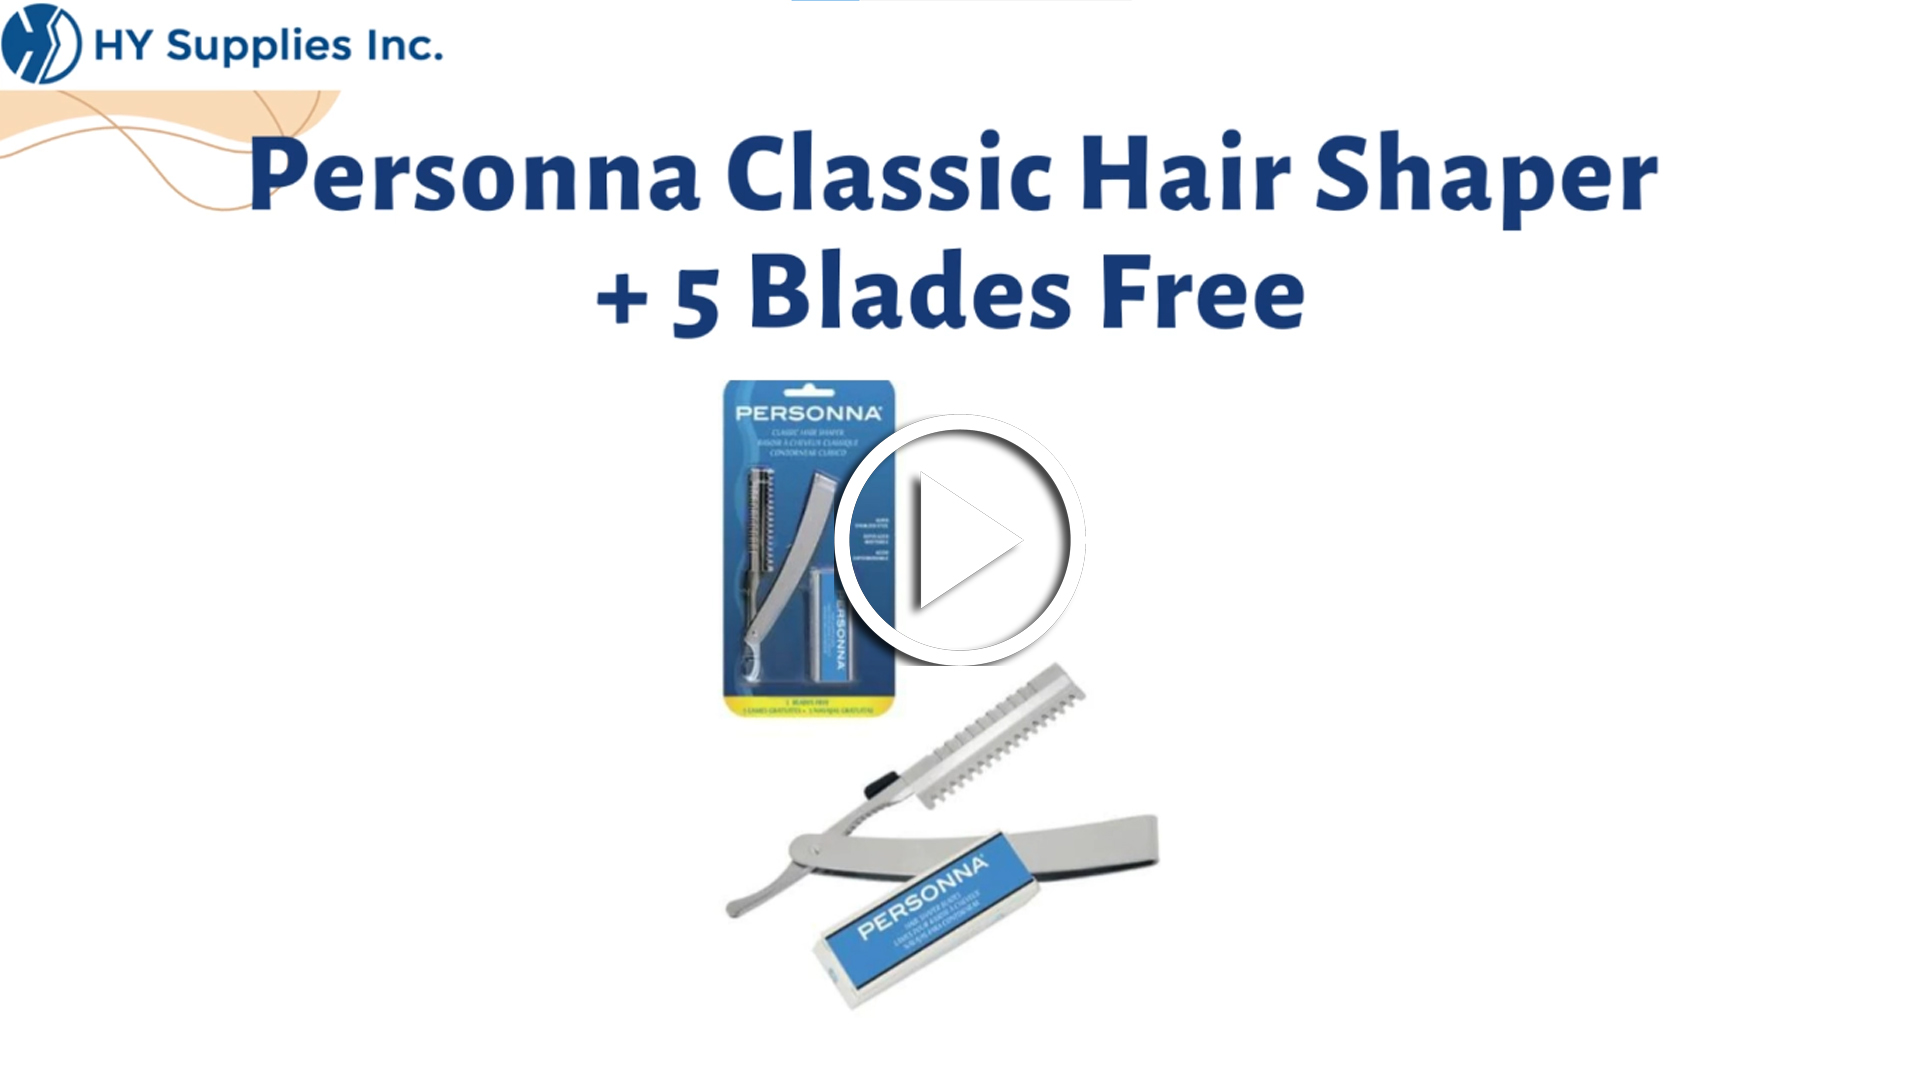 Personna Classic Hair Shaper Free Blades of + 5